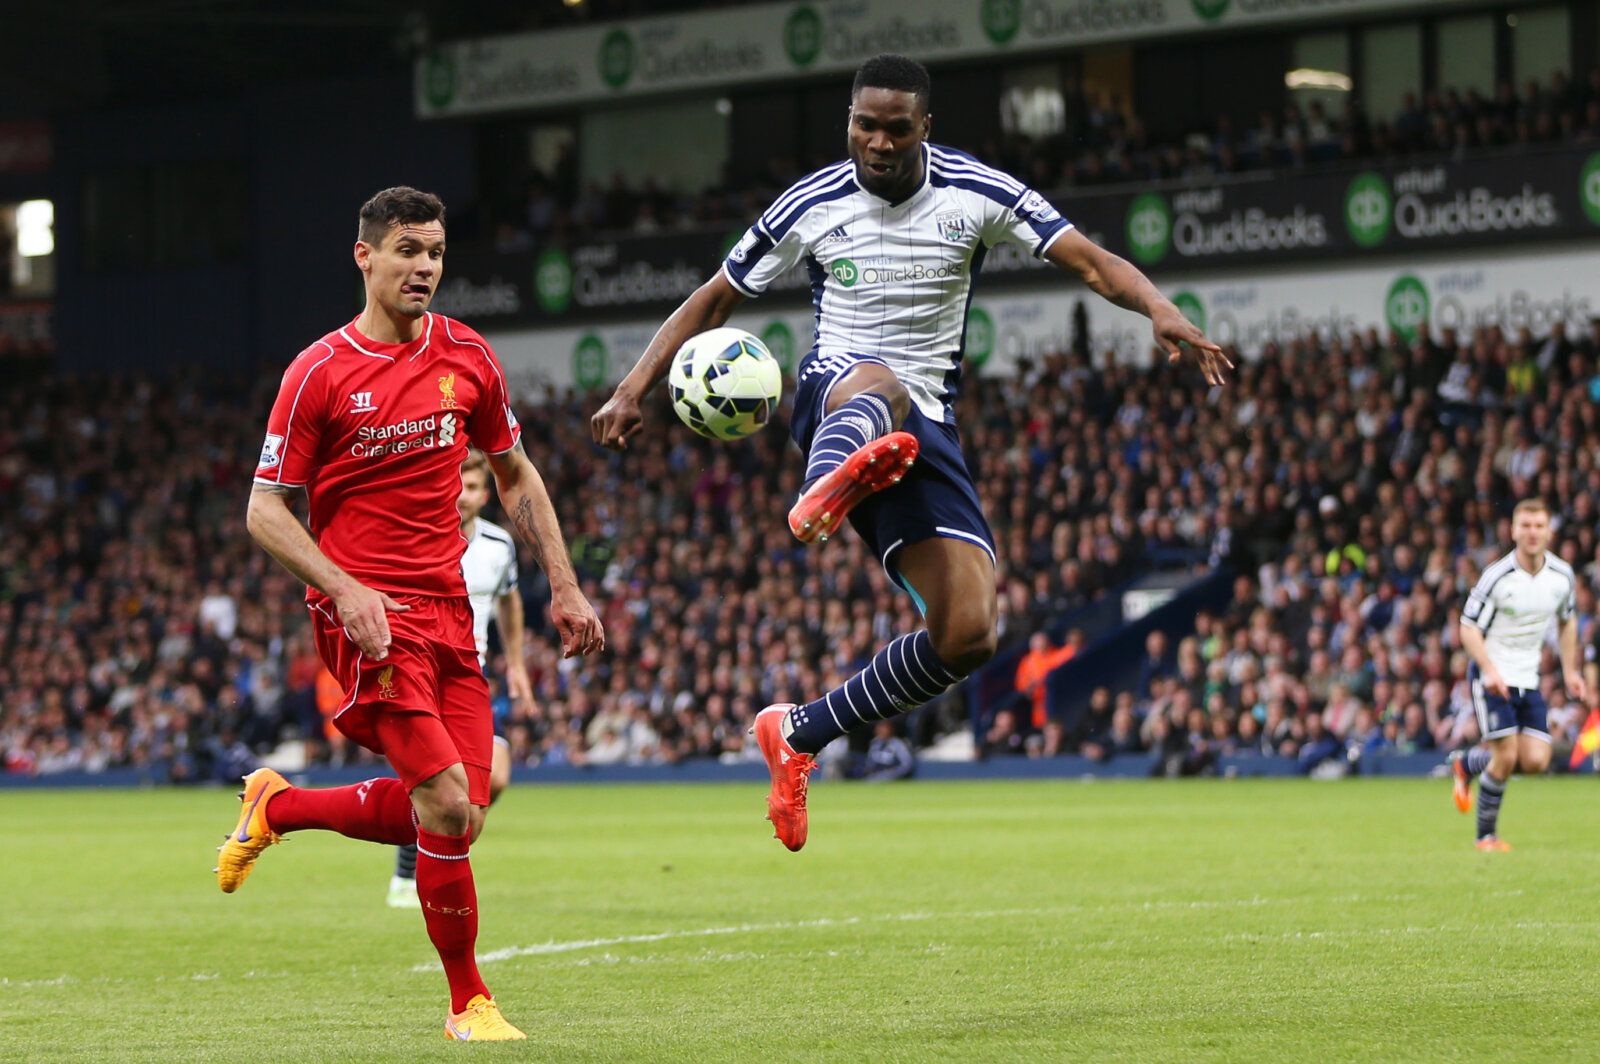 Football - West Bromwich Albion v Liverpool - Barclays Premier League - The Hawthorns - 25/4/15 
Liverpool's Dejan Lovren in action with West Brom's Brown Ideye 
Action Images via Reuters / Alex Morton 
Livepic 
EDITORIAL USE ONLY. No use with unauthorized audio, video, data, fixture lists, club/league logos or 